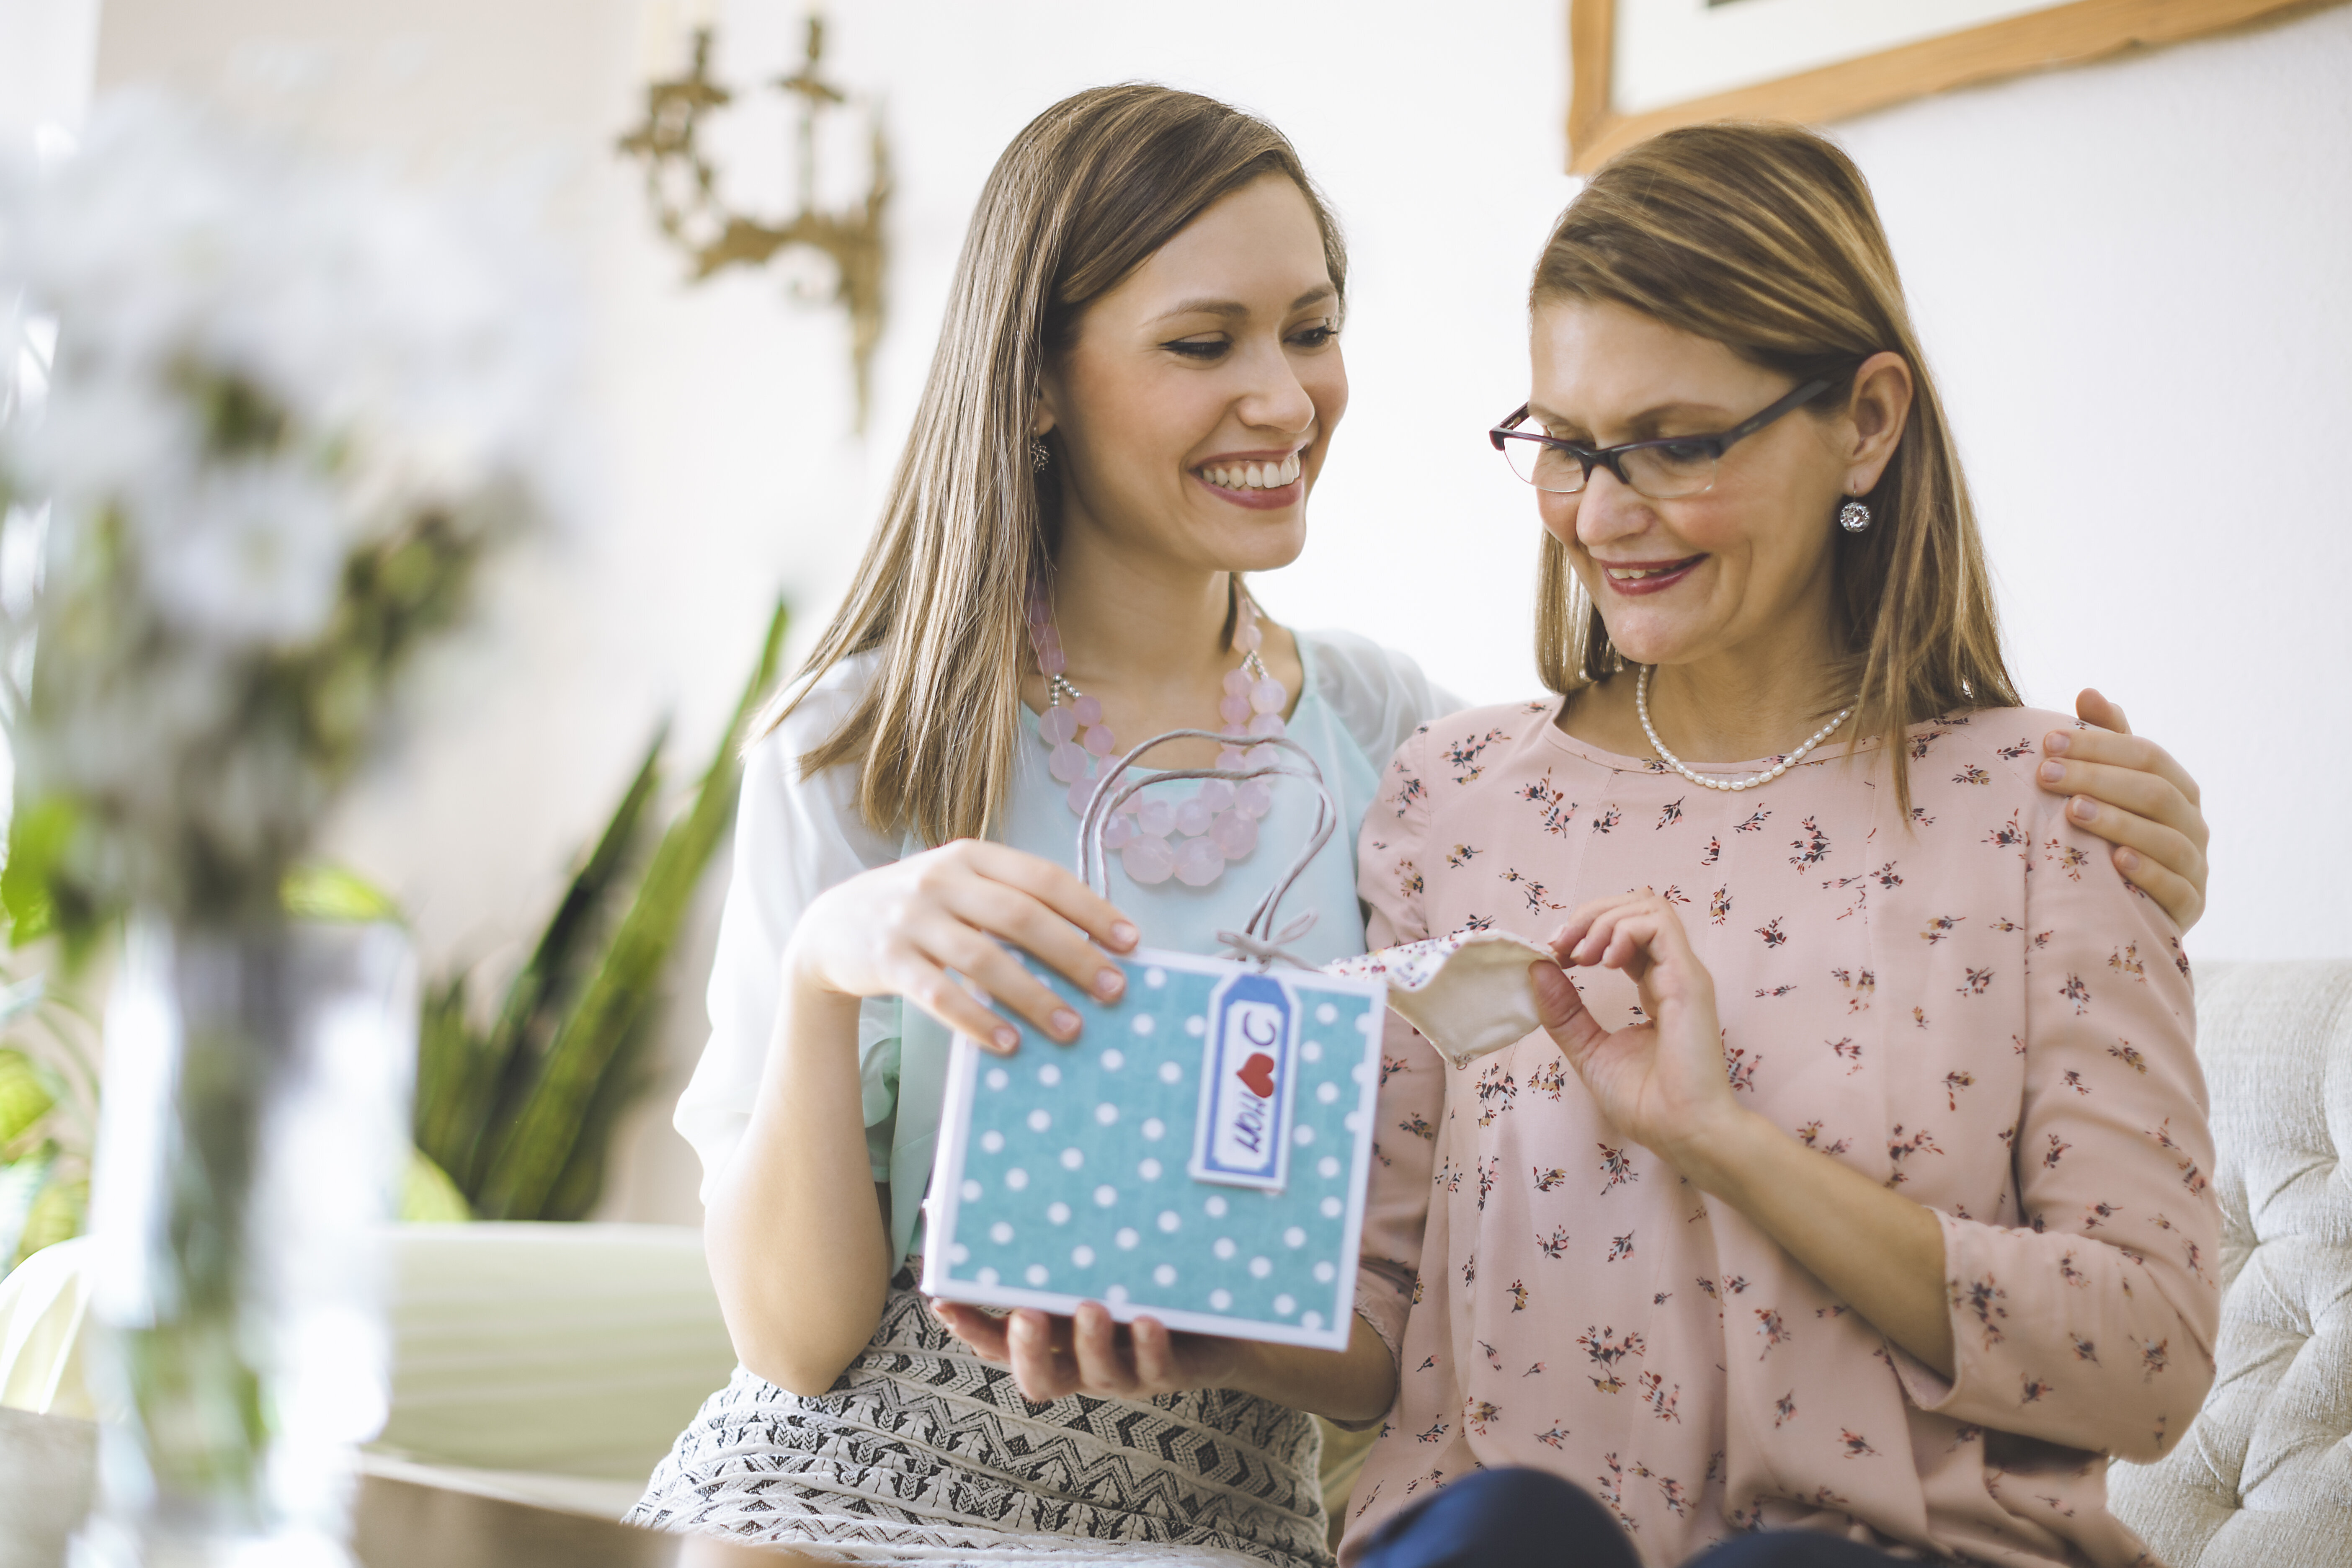 $50 gifts for mom